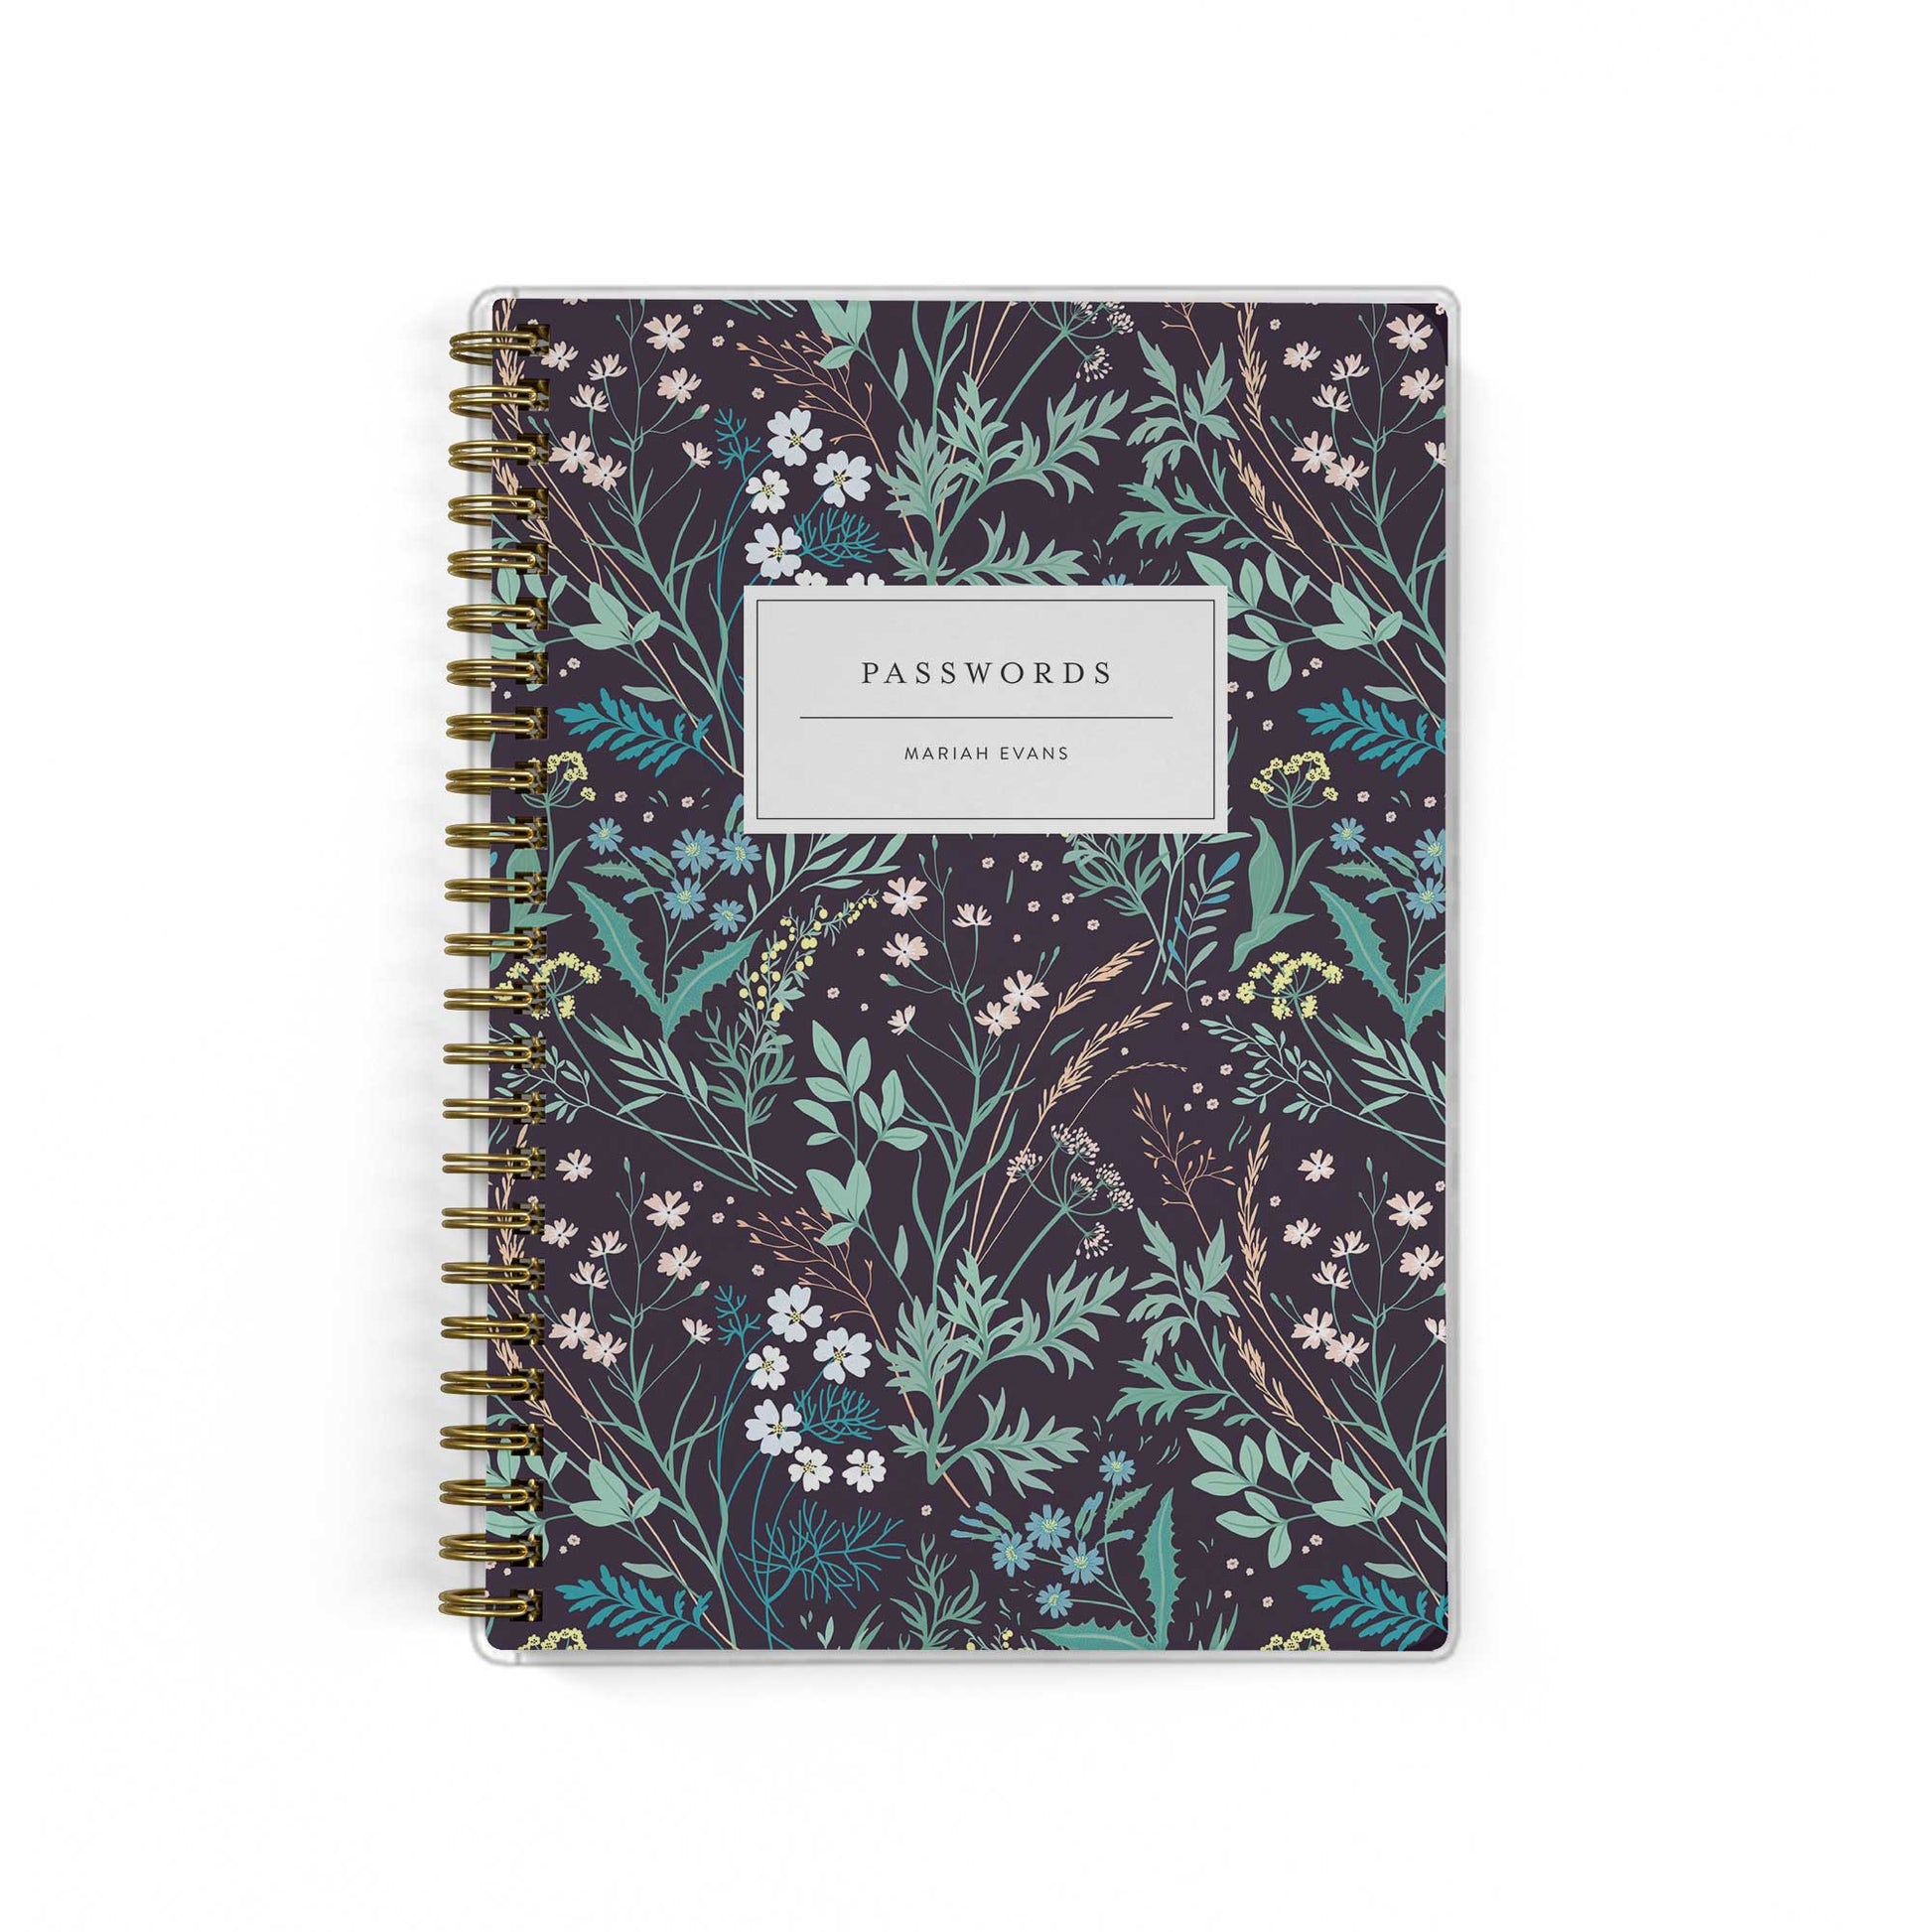 Our password keepers are the perfect little notebook for storing all of your logins, shown in a black wildflower pattern